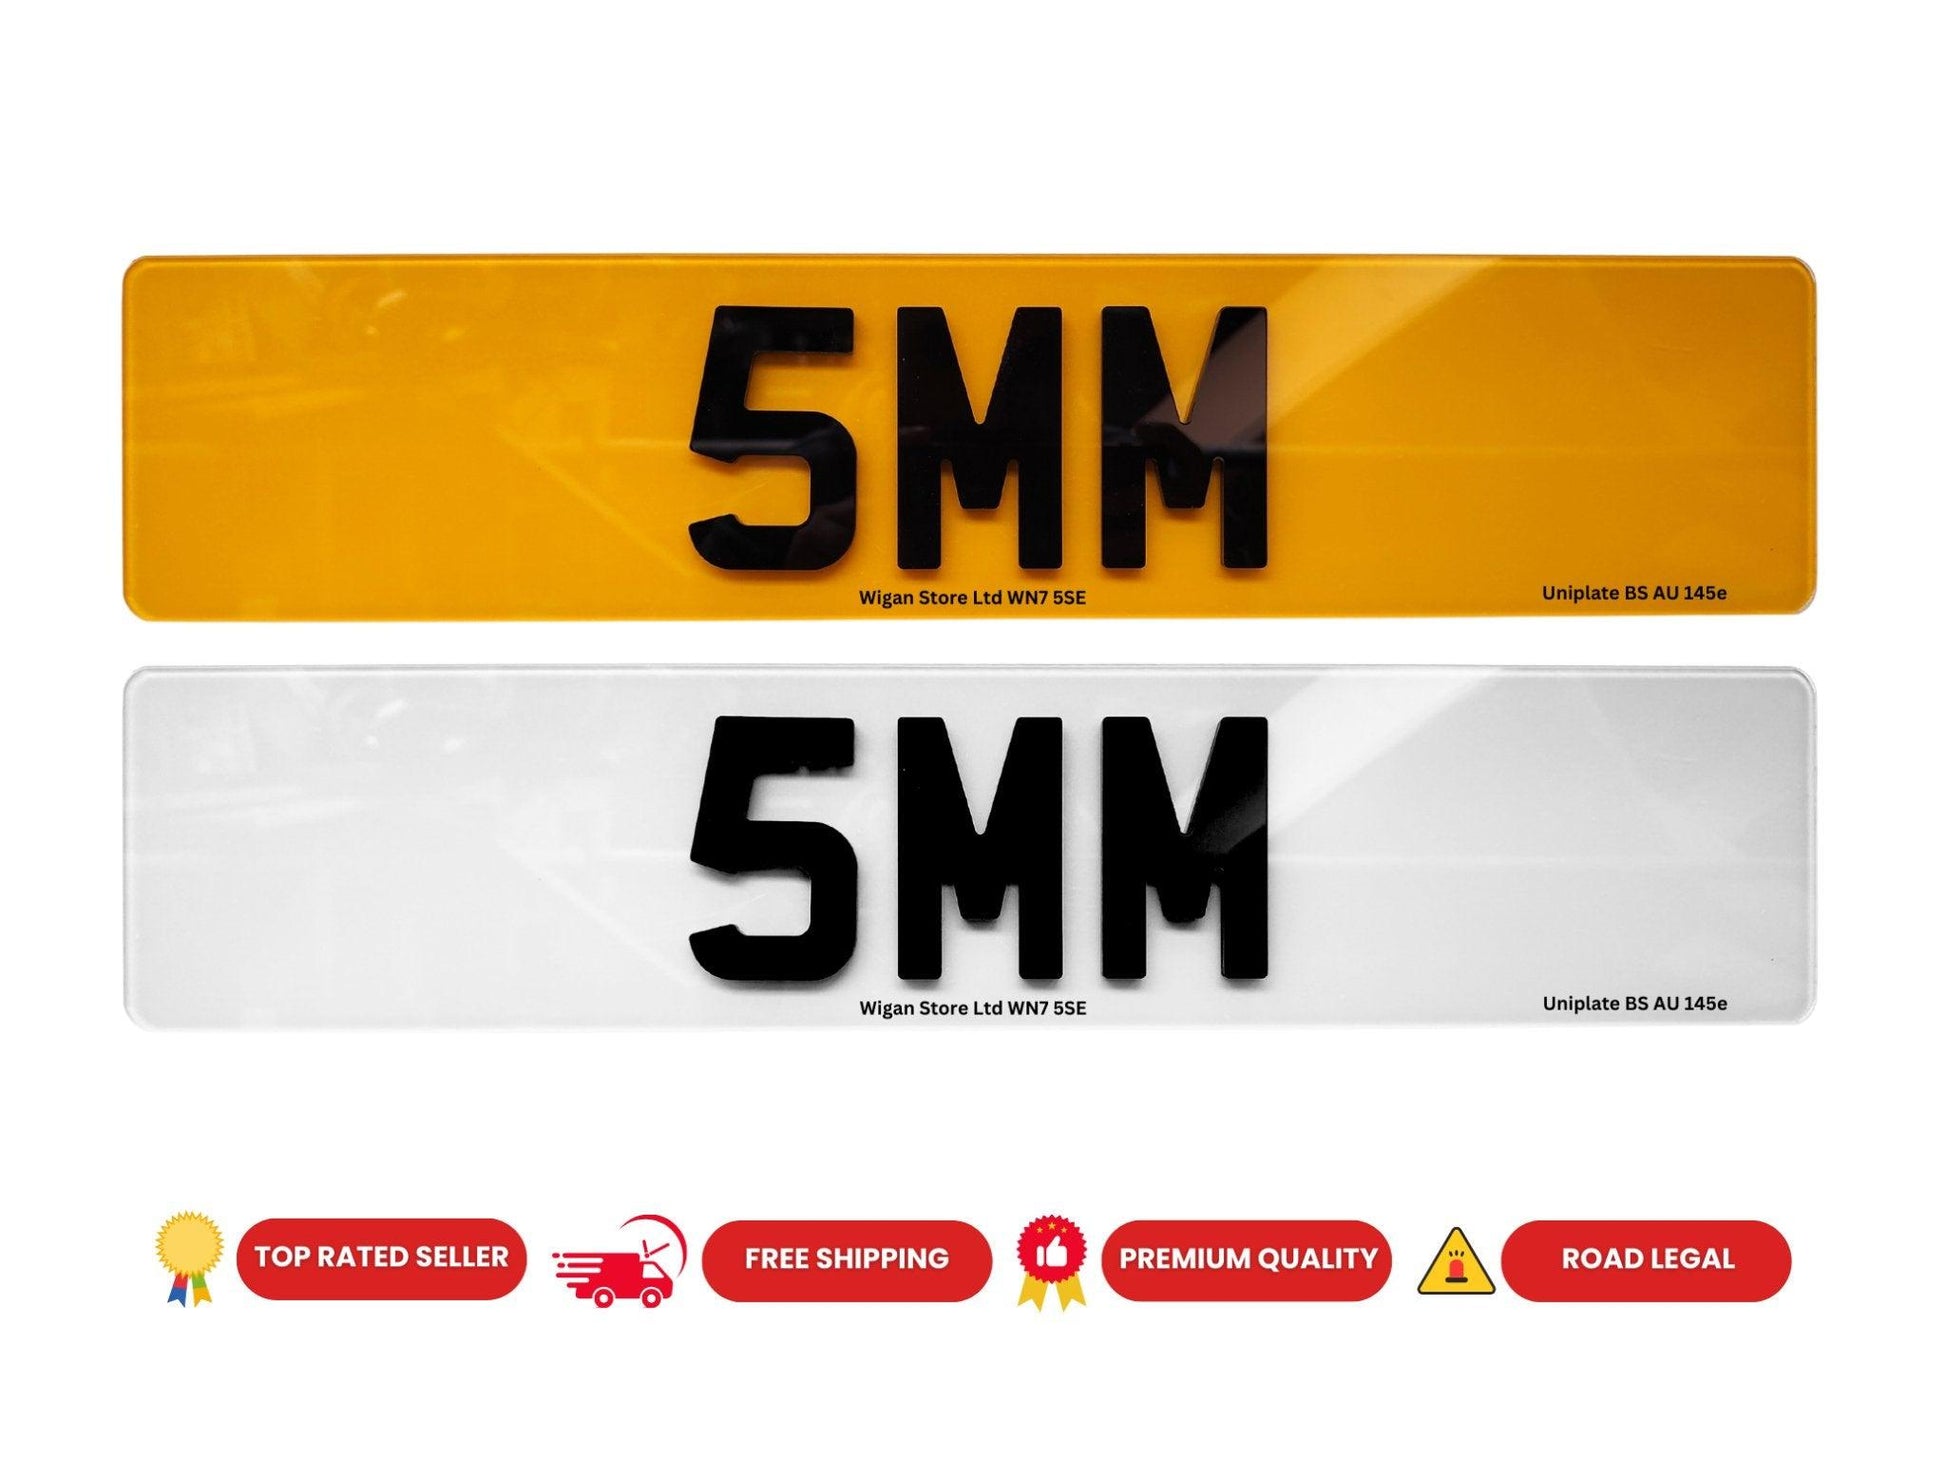 Pair of 4d 5mm acrylic number plate maker in Leigh www.leighnumberplates.com